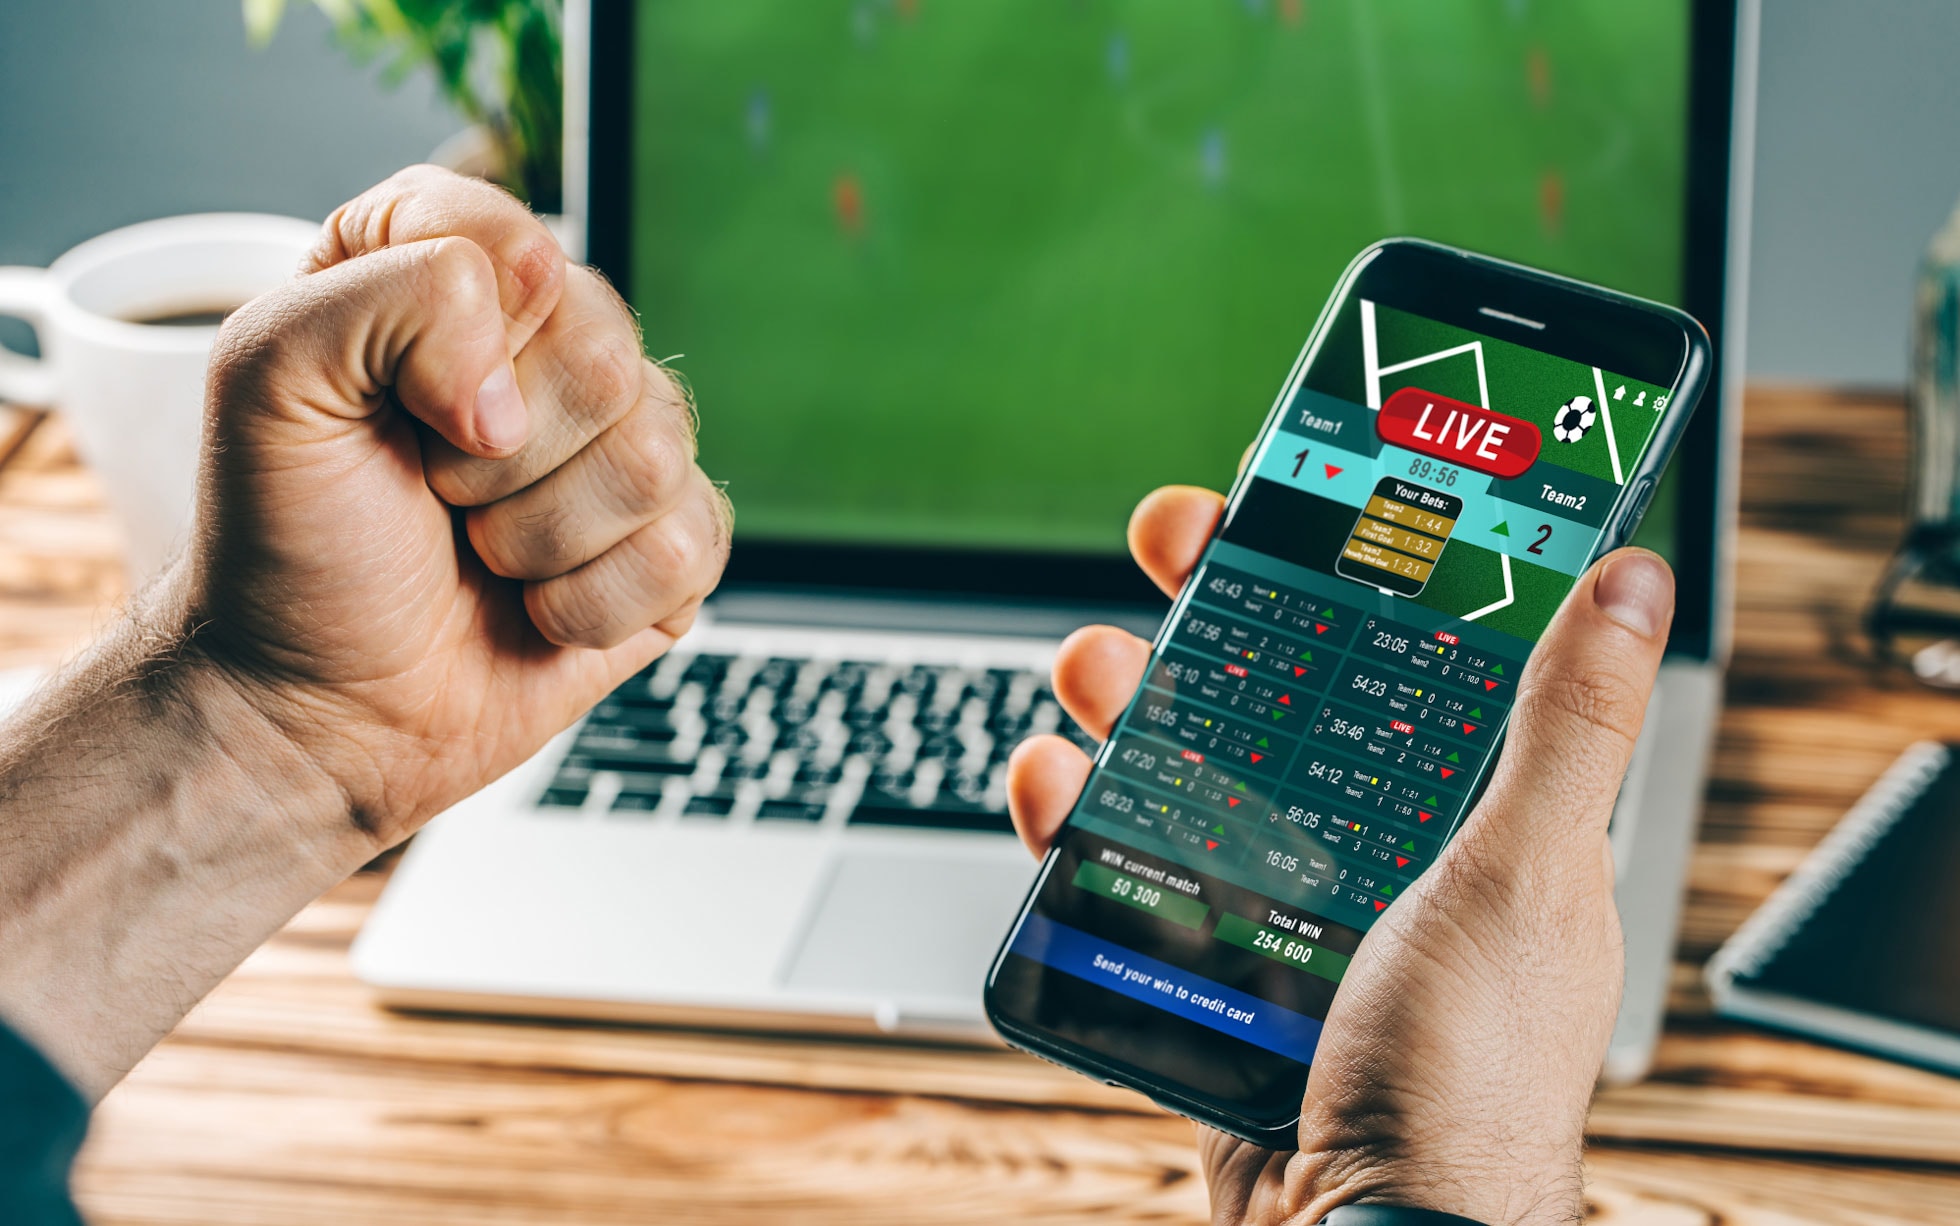 How to successfully analyse football matches?